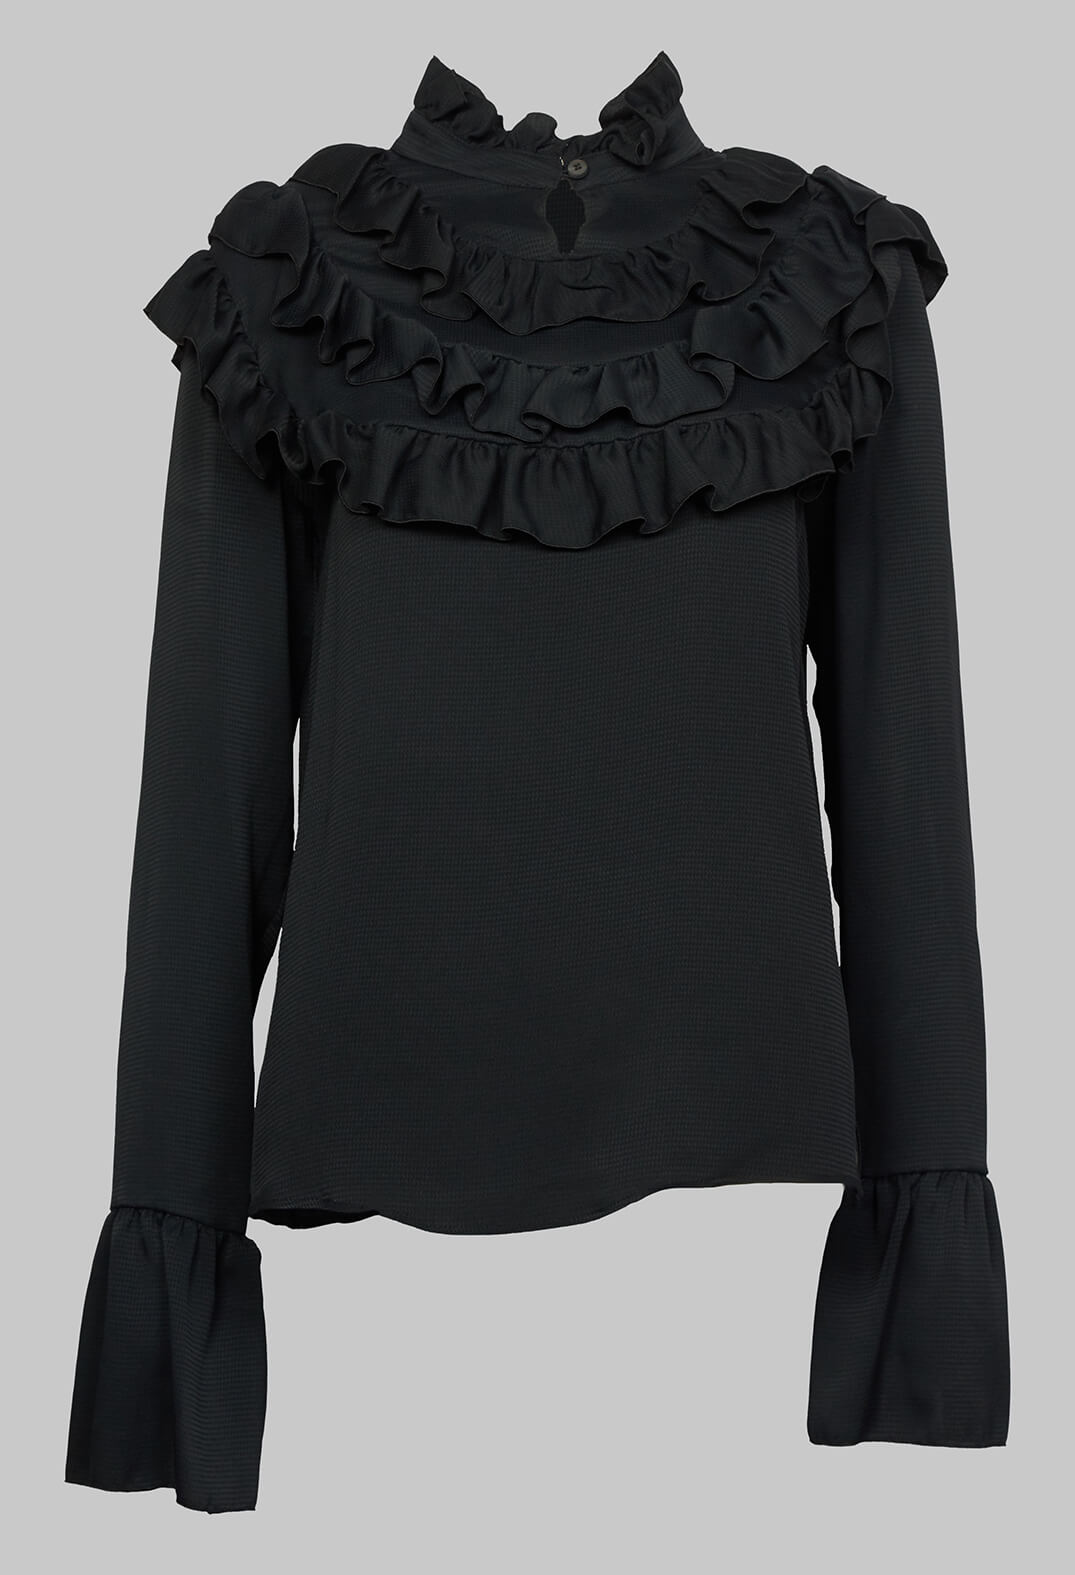 Long Sleeved Blouse with Ruffled Bib in Black